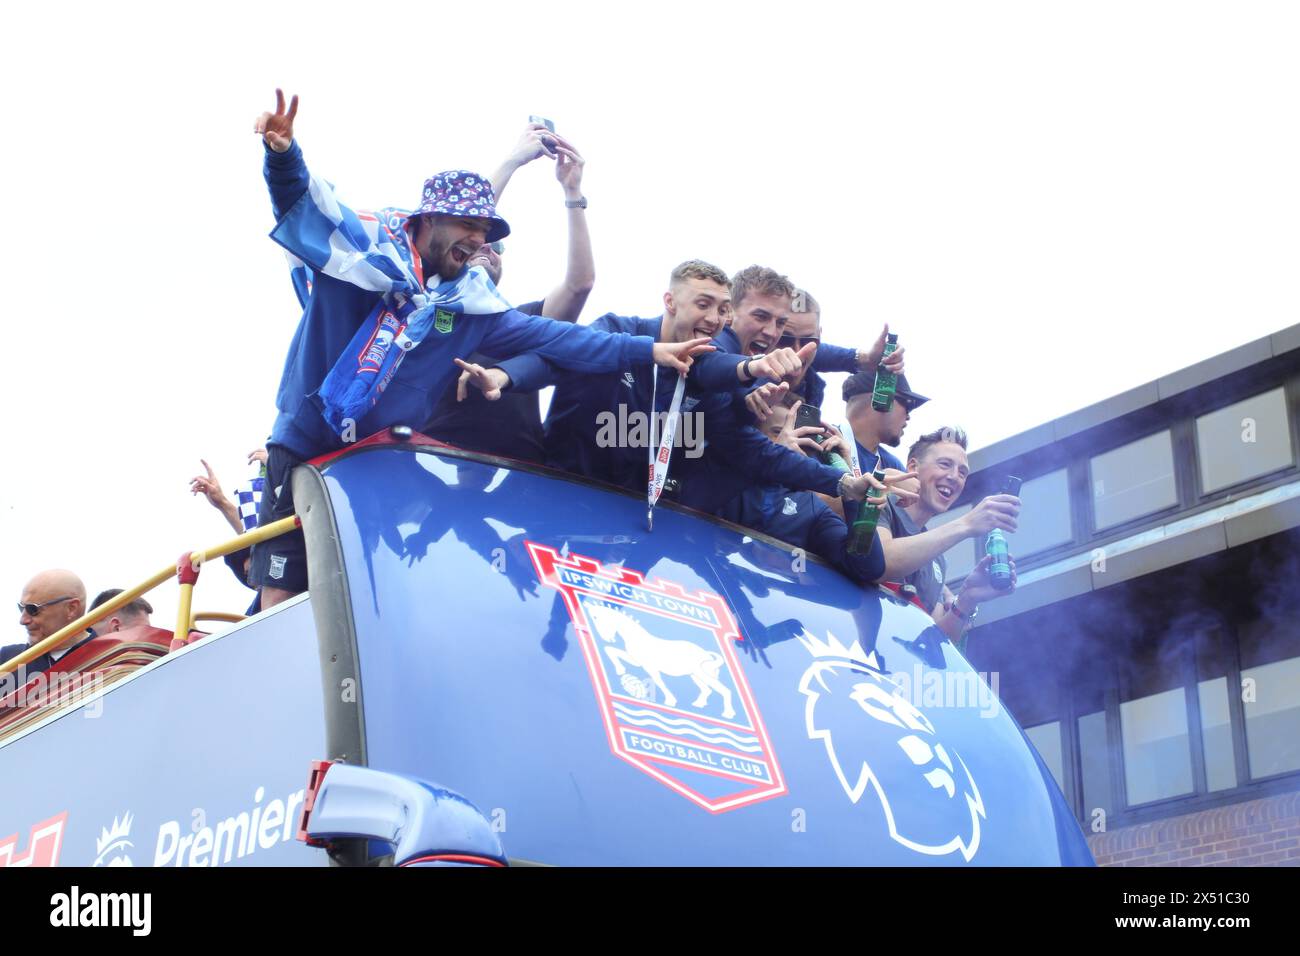 Ipswich, UK. 6th May, 2024. Ipswich Town Football Club celebrate back to back promotions, this season to the Premier League. Players at the front of the team bus. Credit:Eastern Views/Alamy Live News Stock Photo